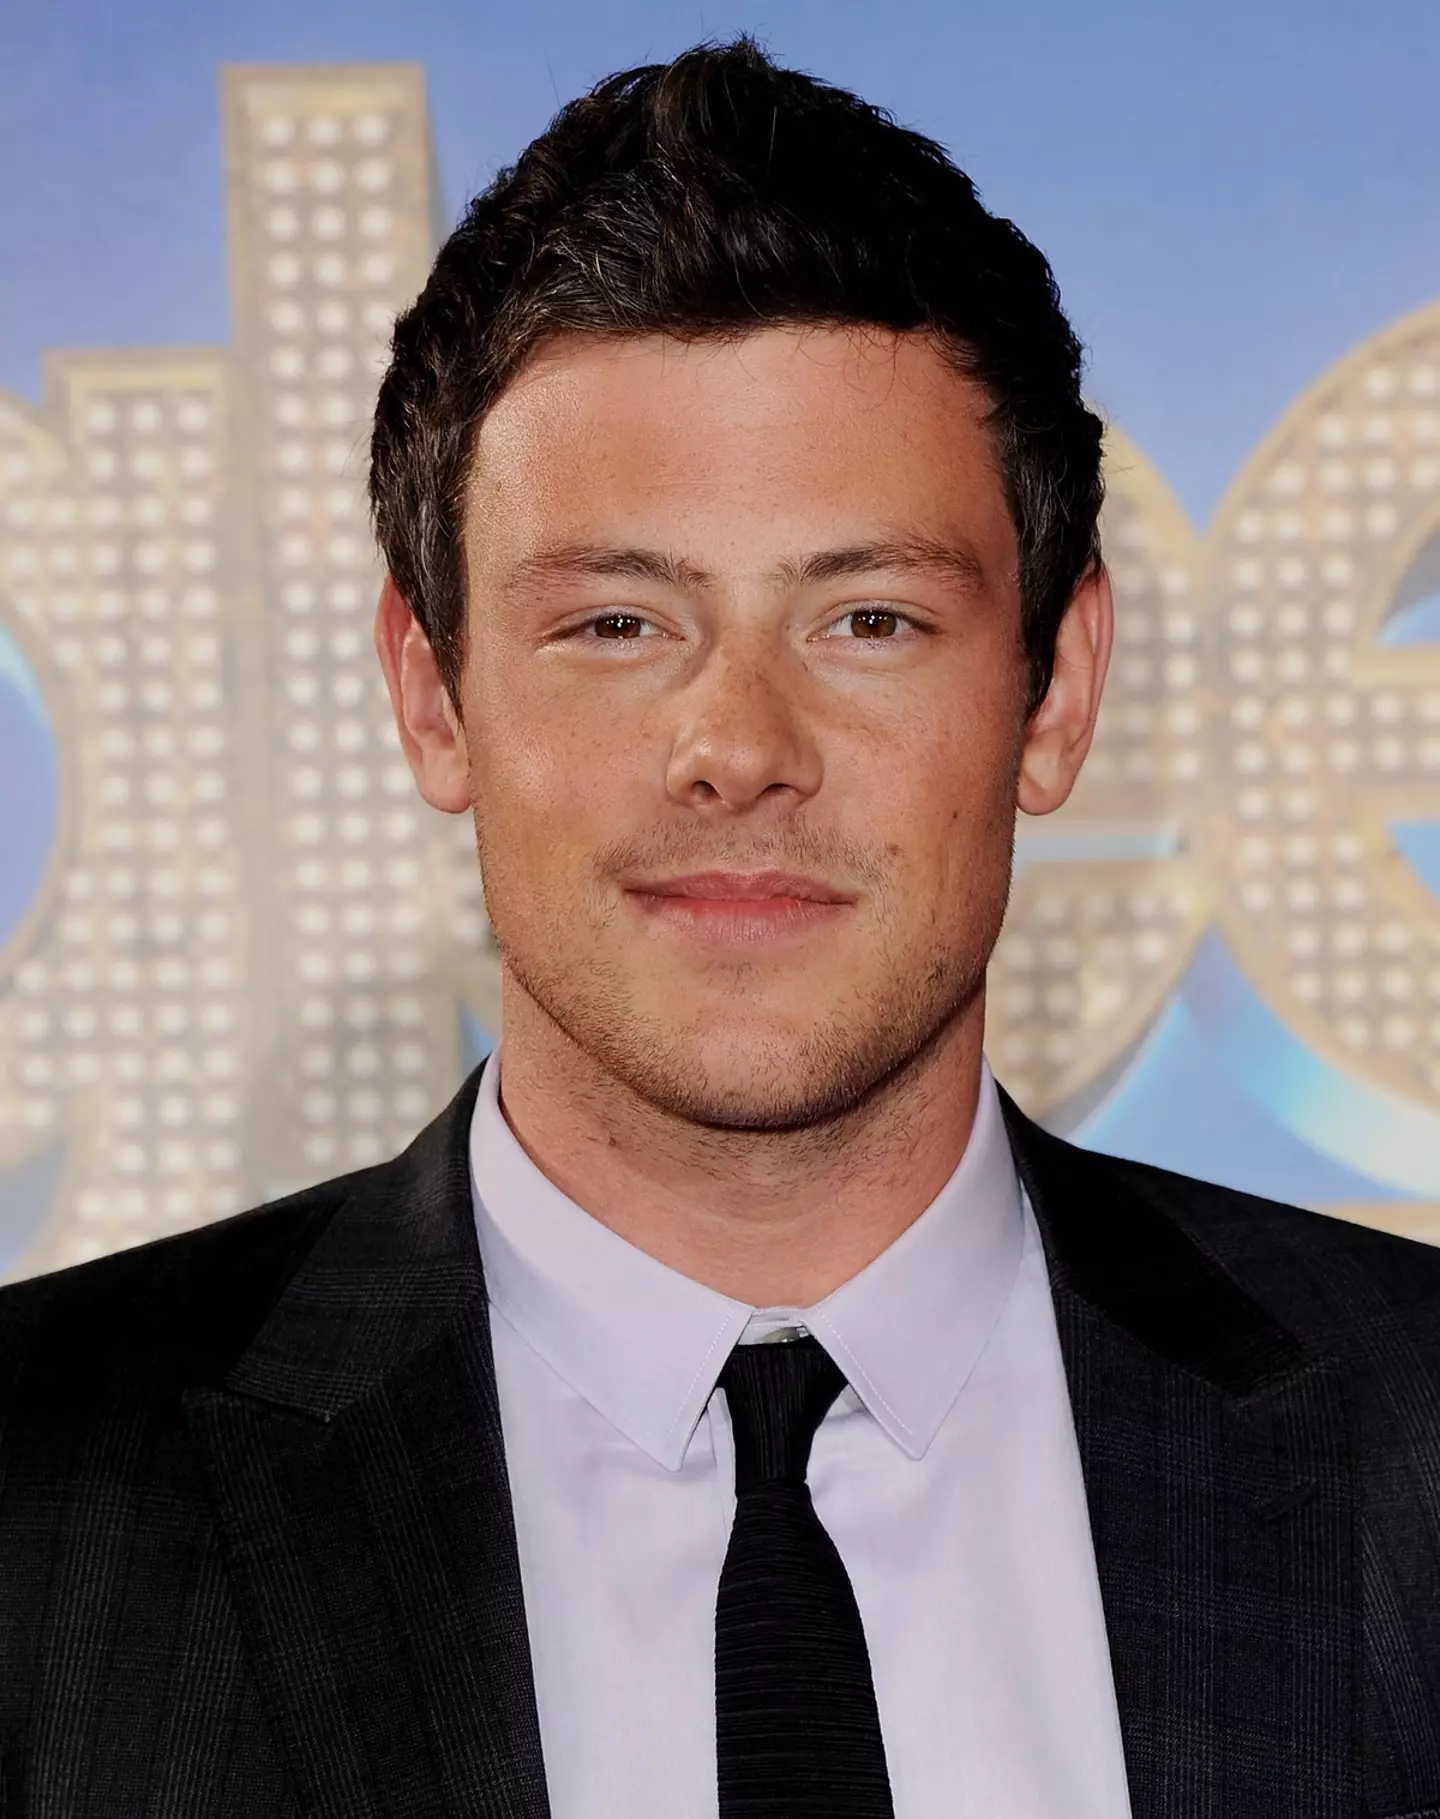 Cory Monteith was best known for his role in Glee.